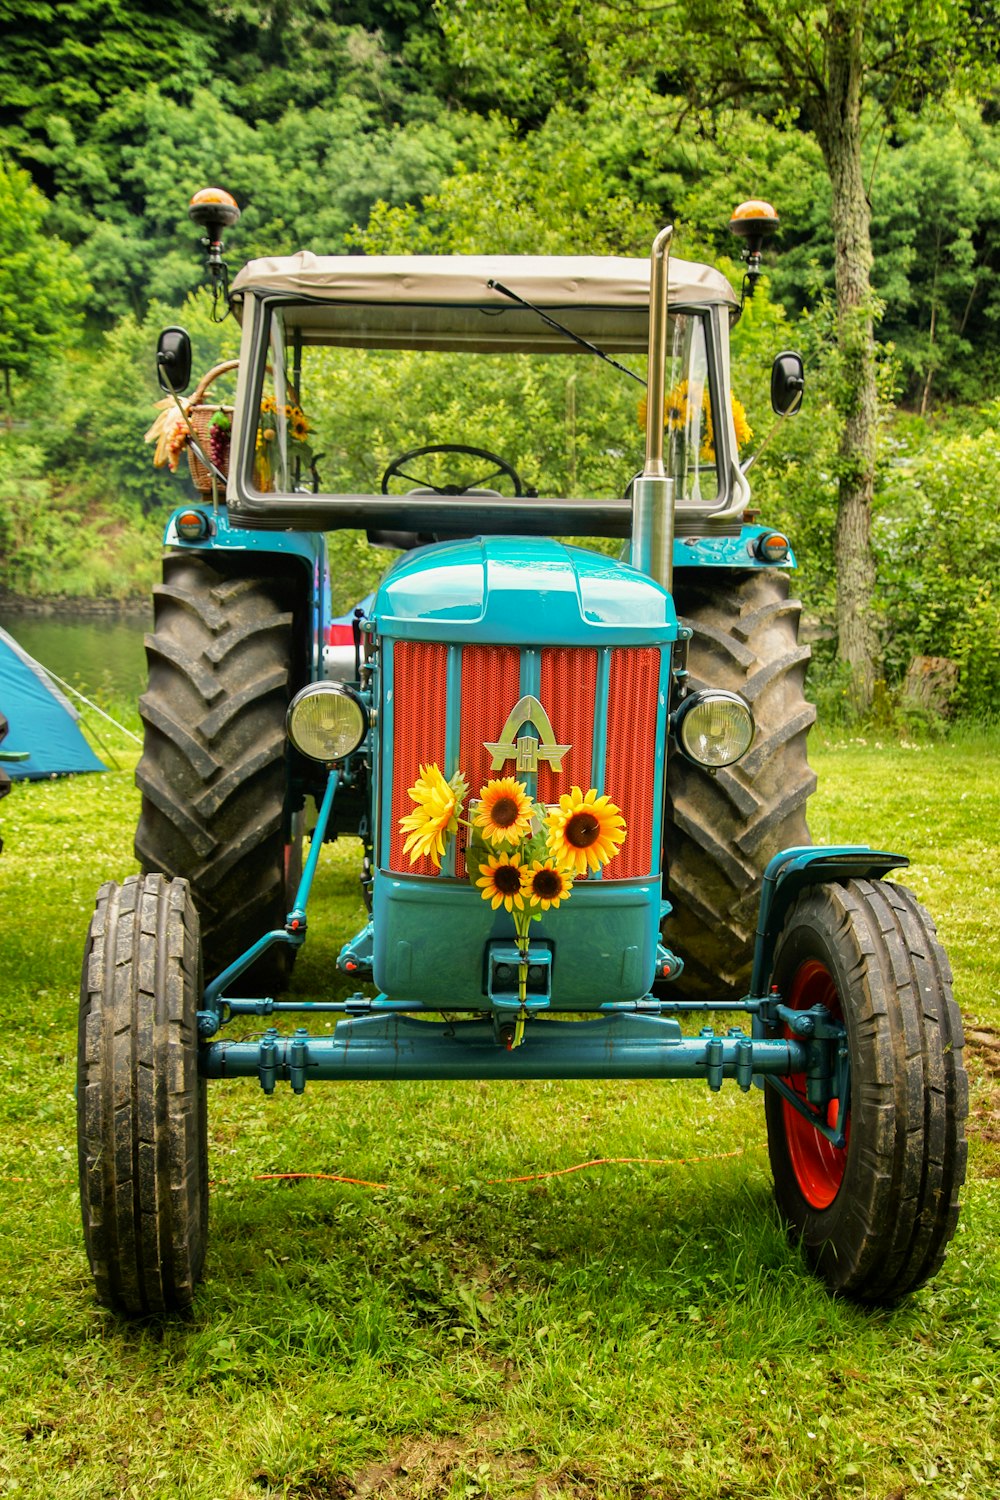 teal and white tractor